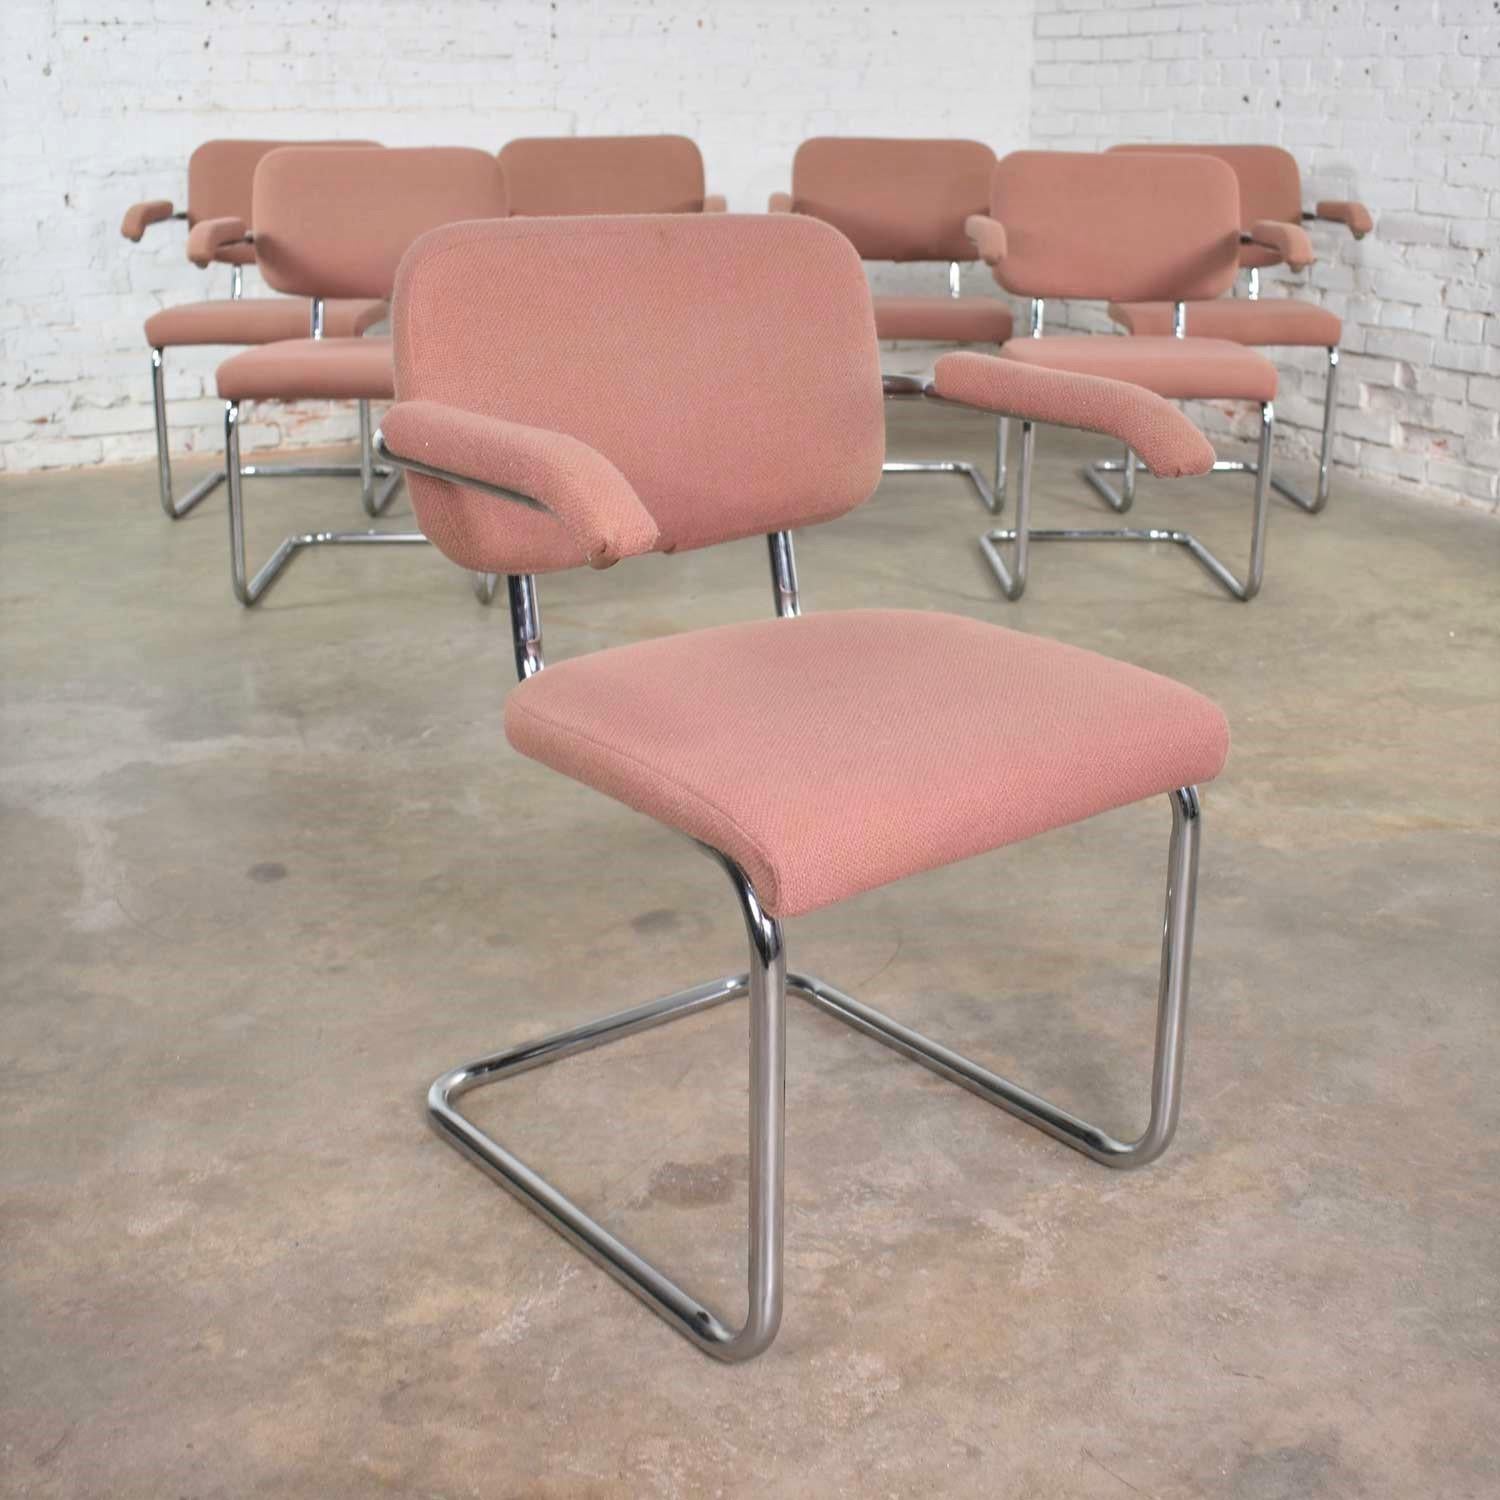 20th Century Set of 7 Cantilevered Chrome and Mauve Breuer Cesca Style Dining Chairs by Virco